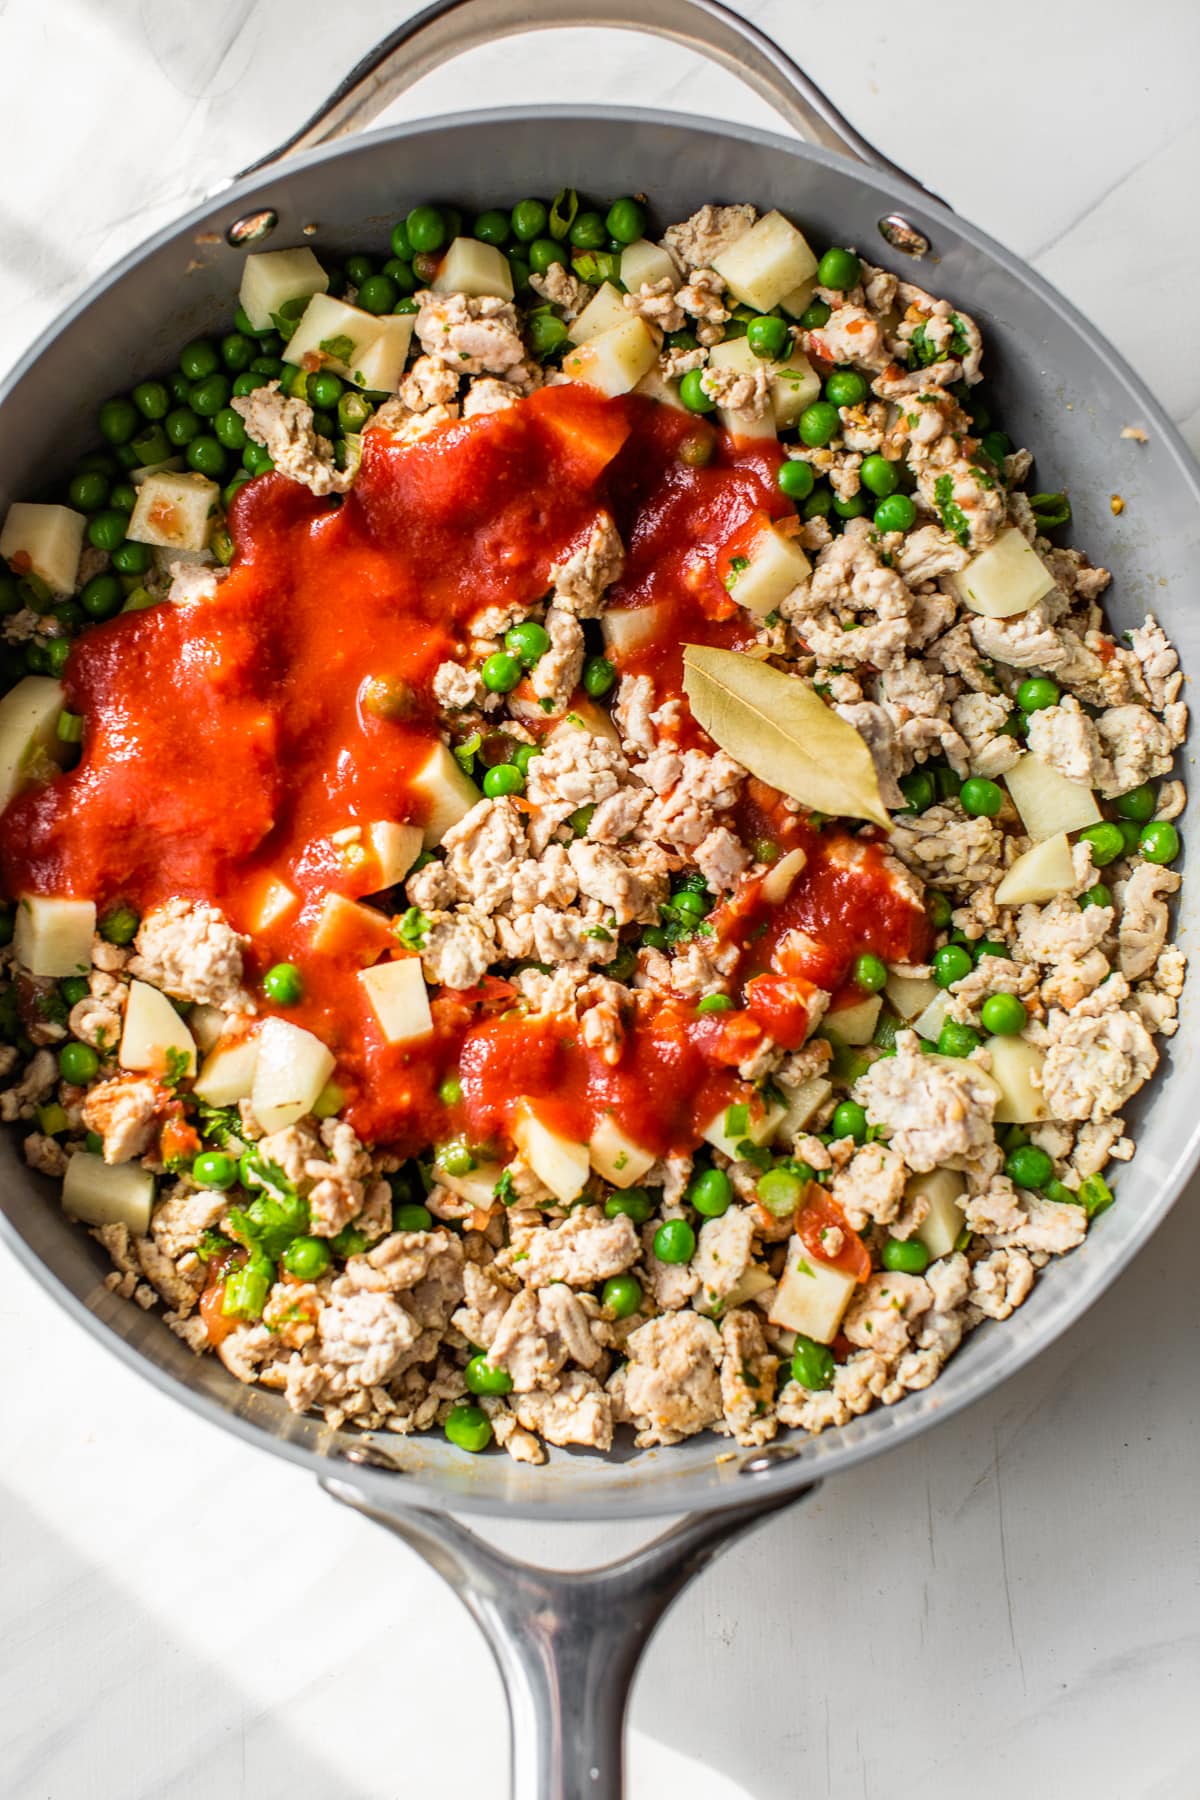 skillet with ground turkey, peas, tomatoes and potatoes